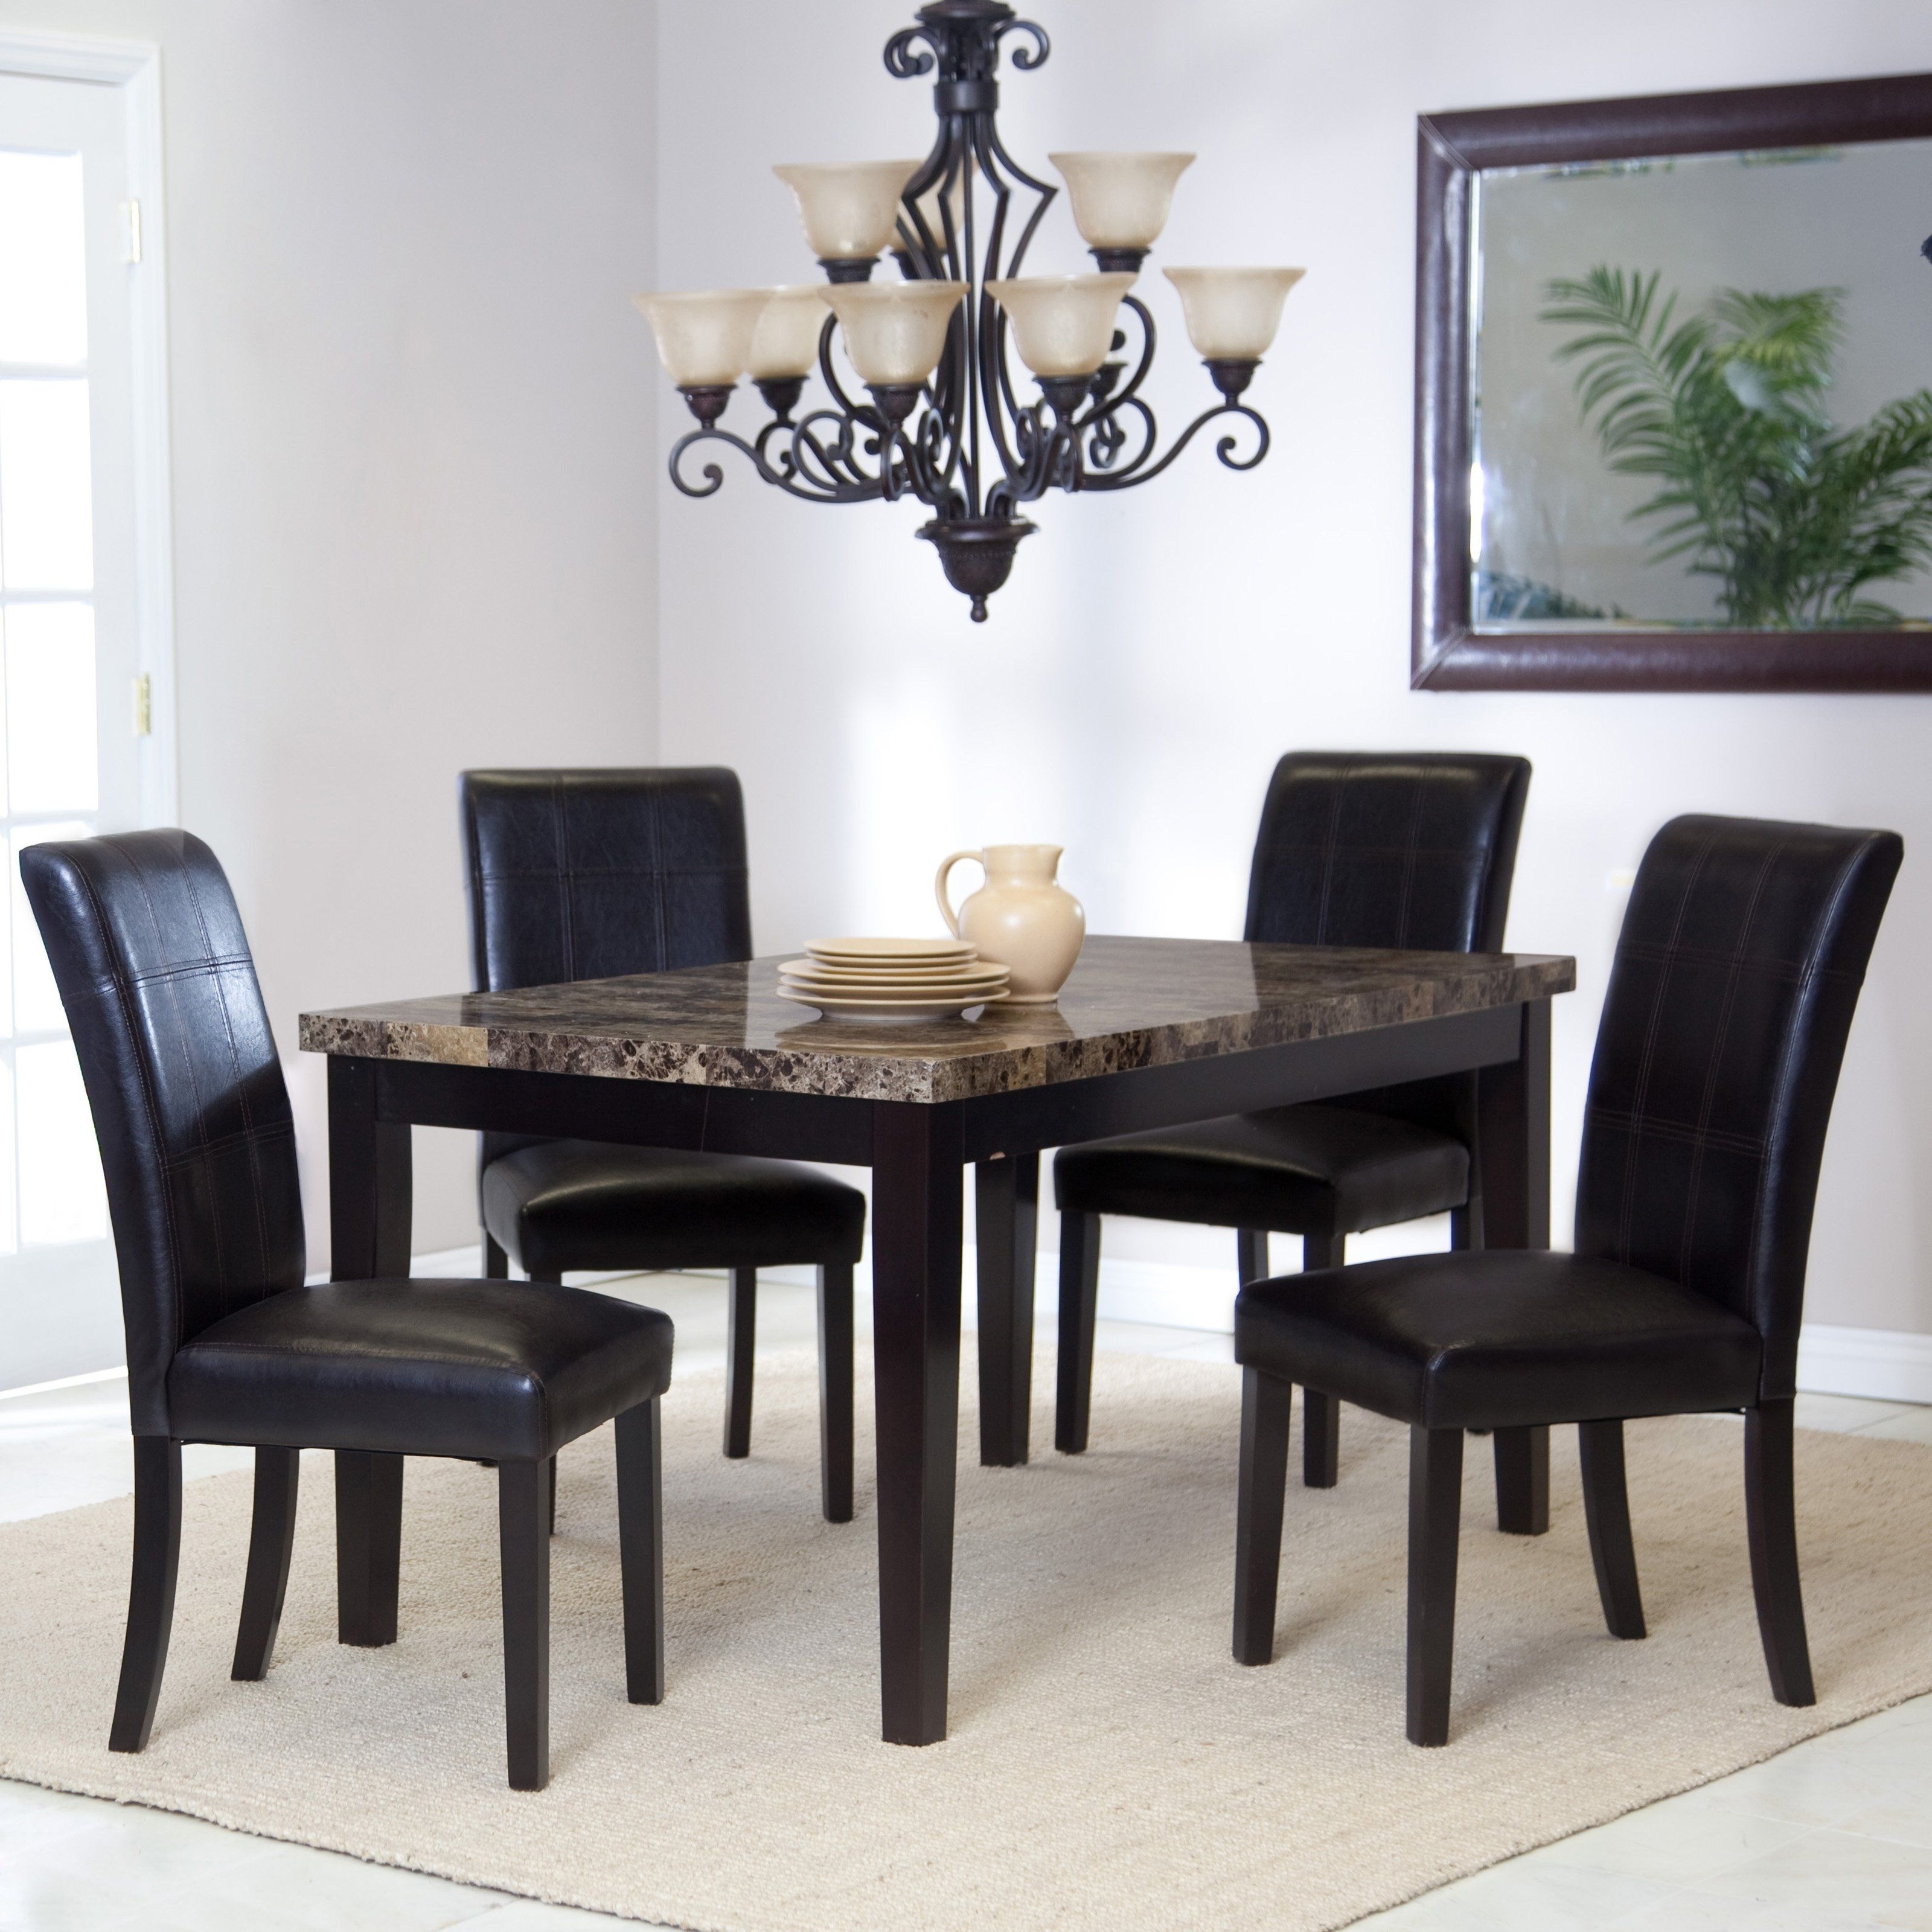 Palazzo 5 Piece Dining Set | Hayneedle With Recent Palazzo Rectangle Dining Tables (View 6 of 20)